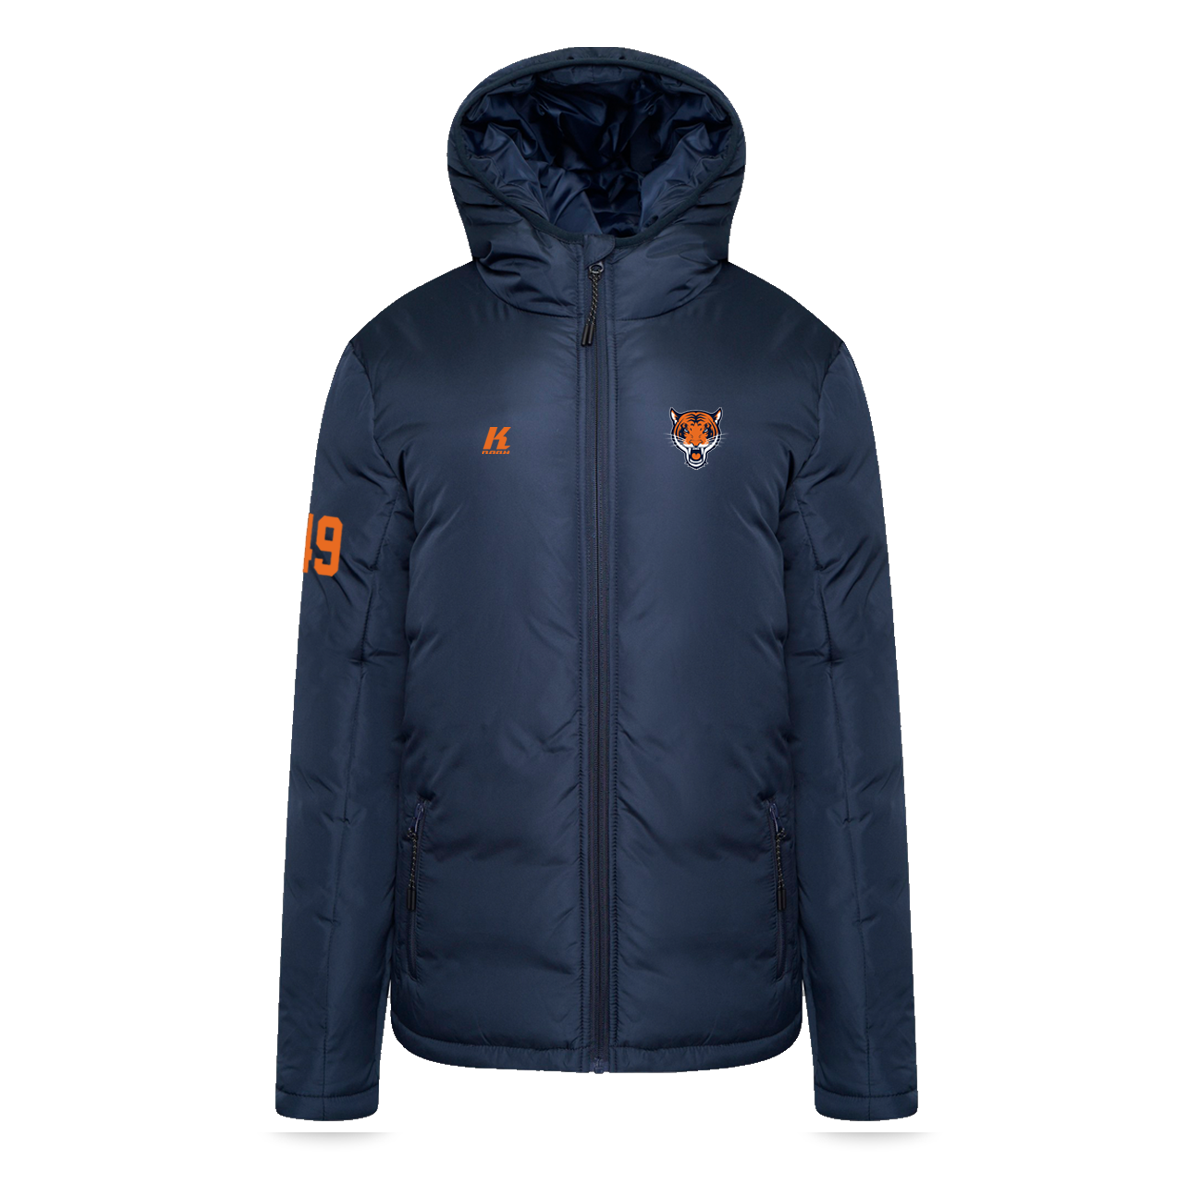 Tigers Gameday Jacket with Playernumber/Initials